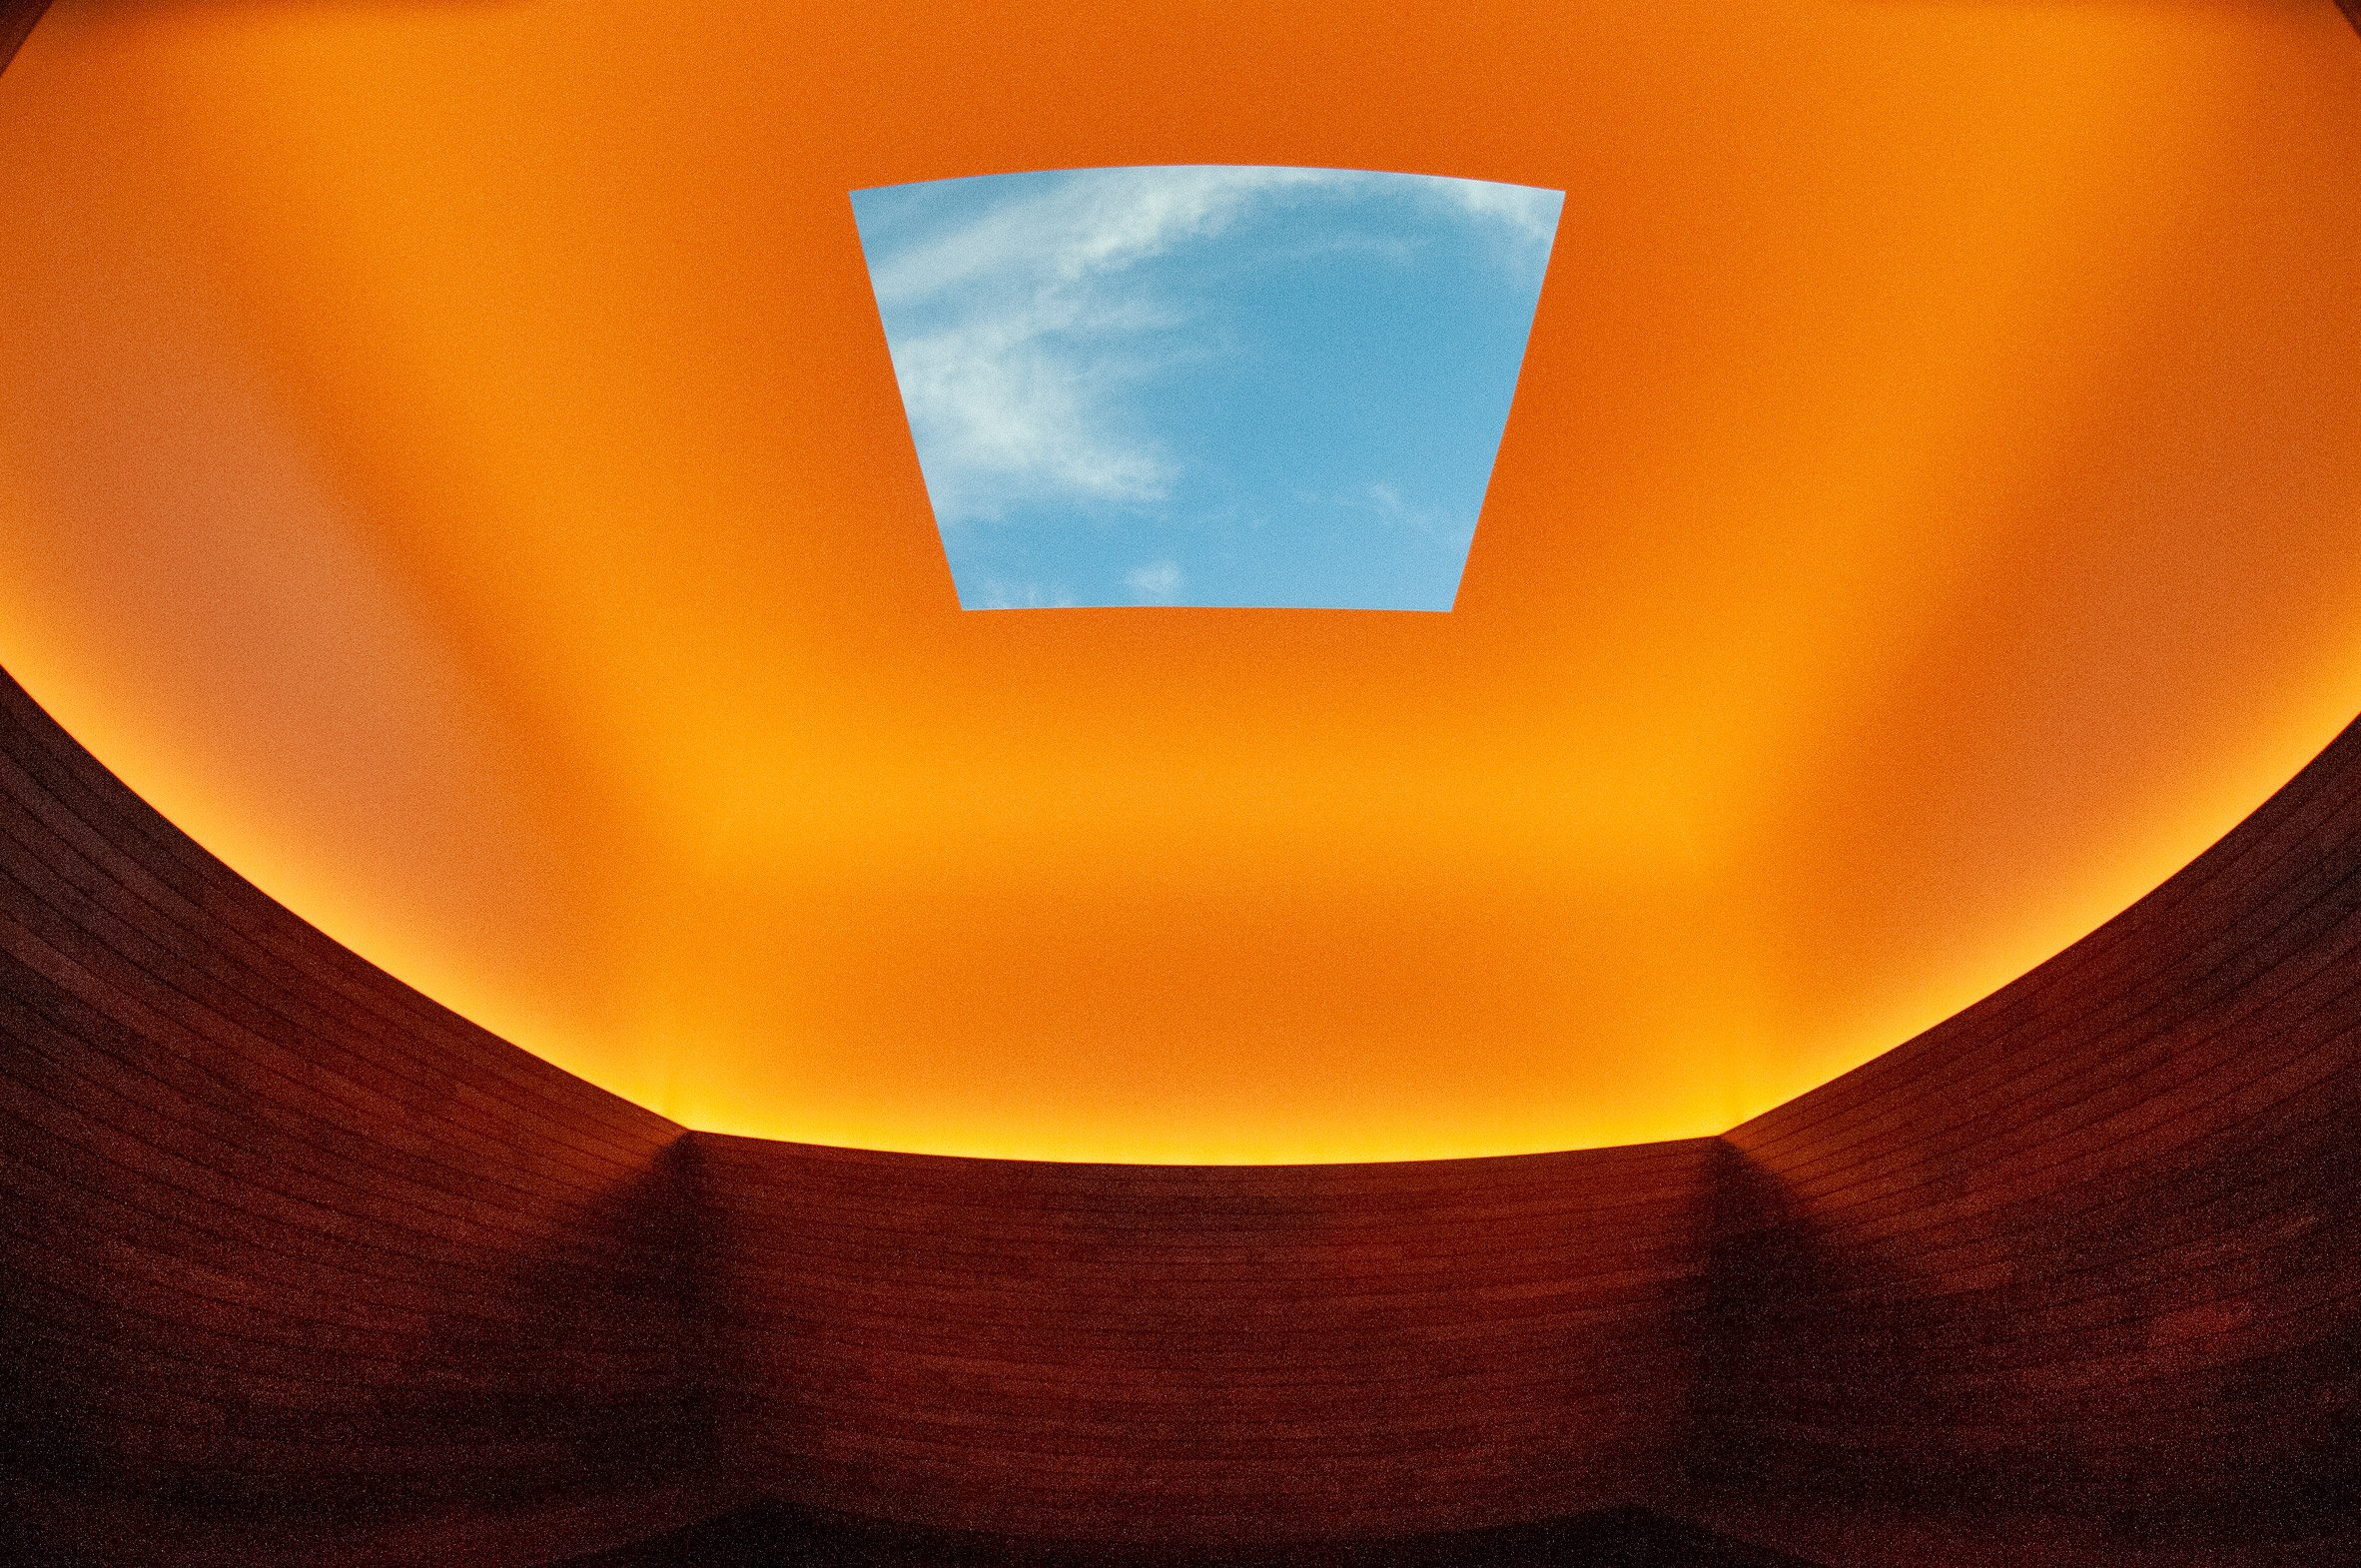 James Turrell creates “transcendent” installation in the Rocky